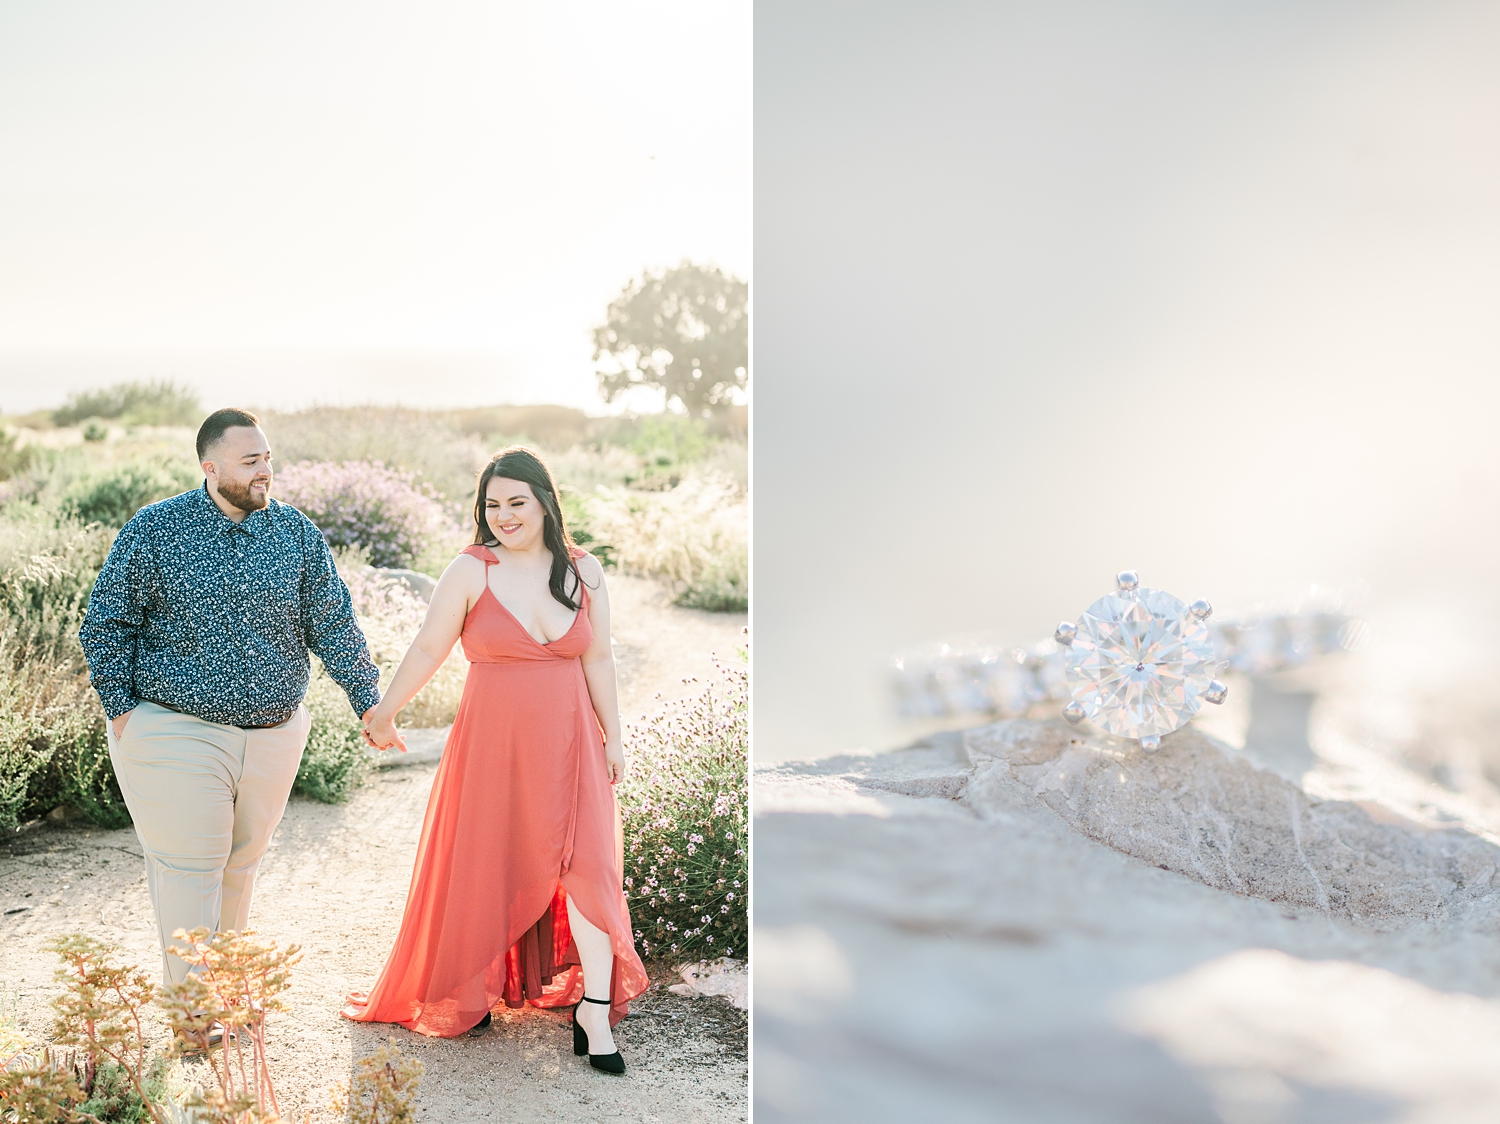 Beach Cliffs Engagement Session at Sunset | Nataly Hernandez Photography | Edwin and Susana-37.jpg